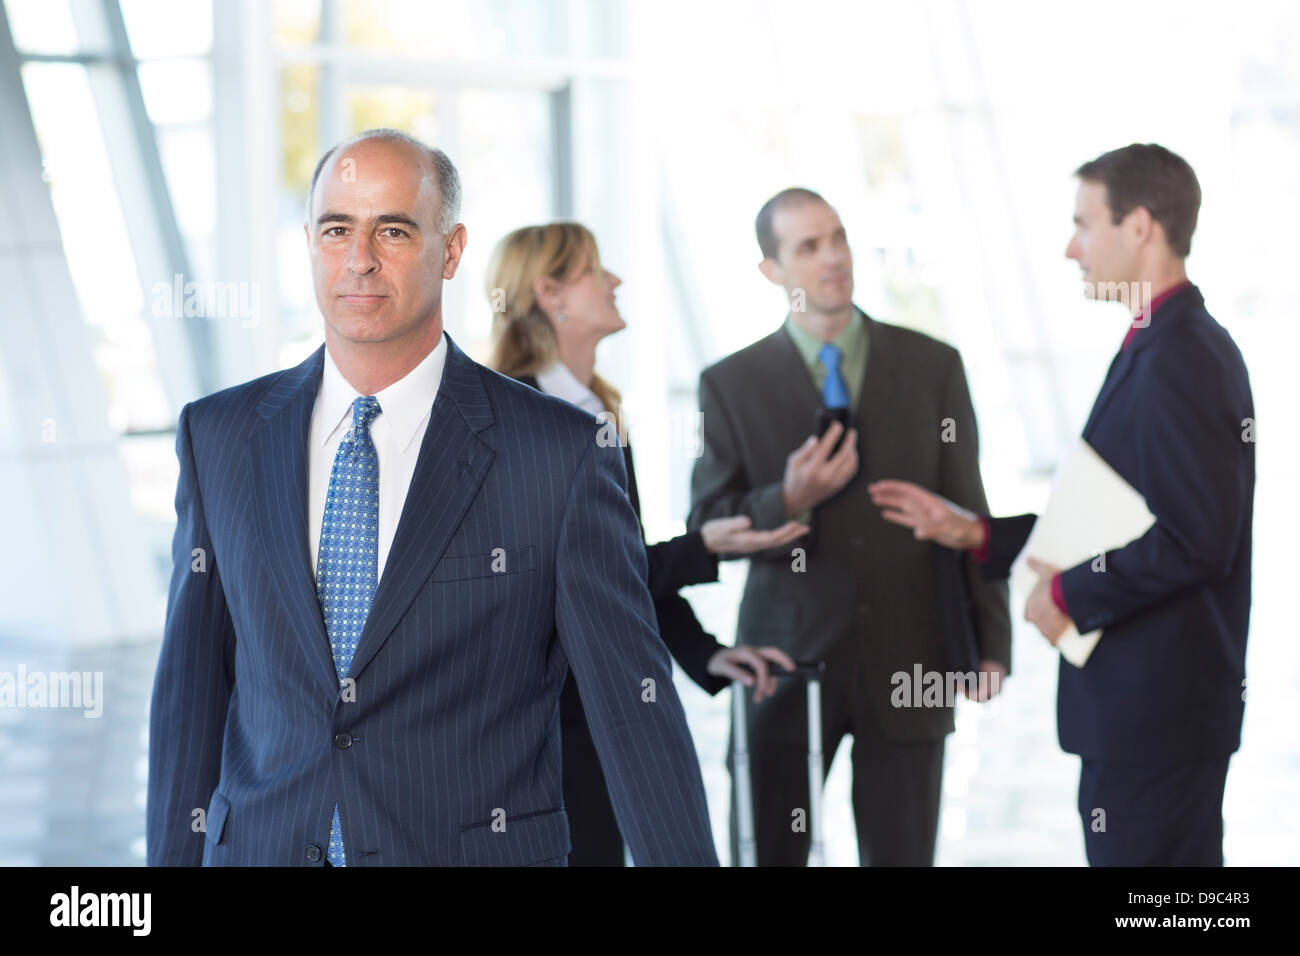 Mature businessman with colleagues in background Stock Photo